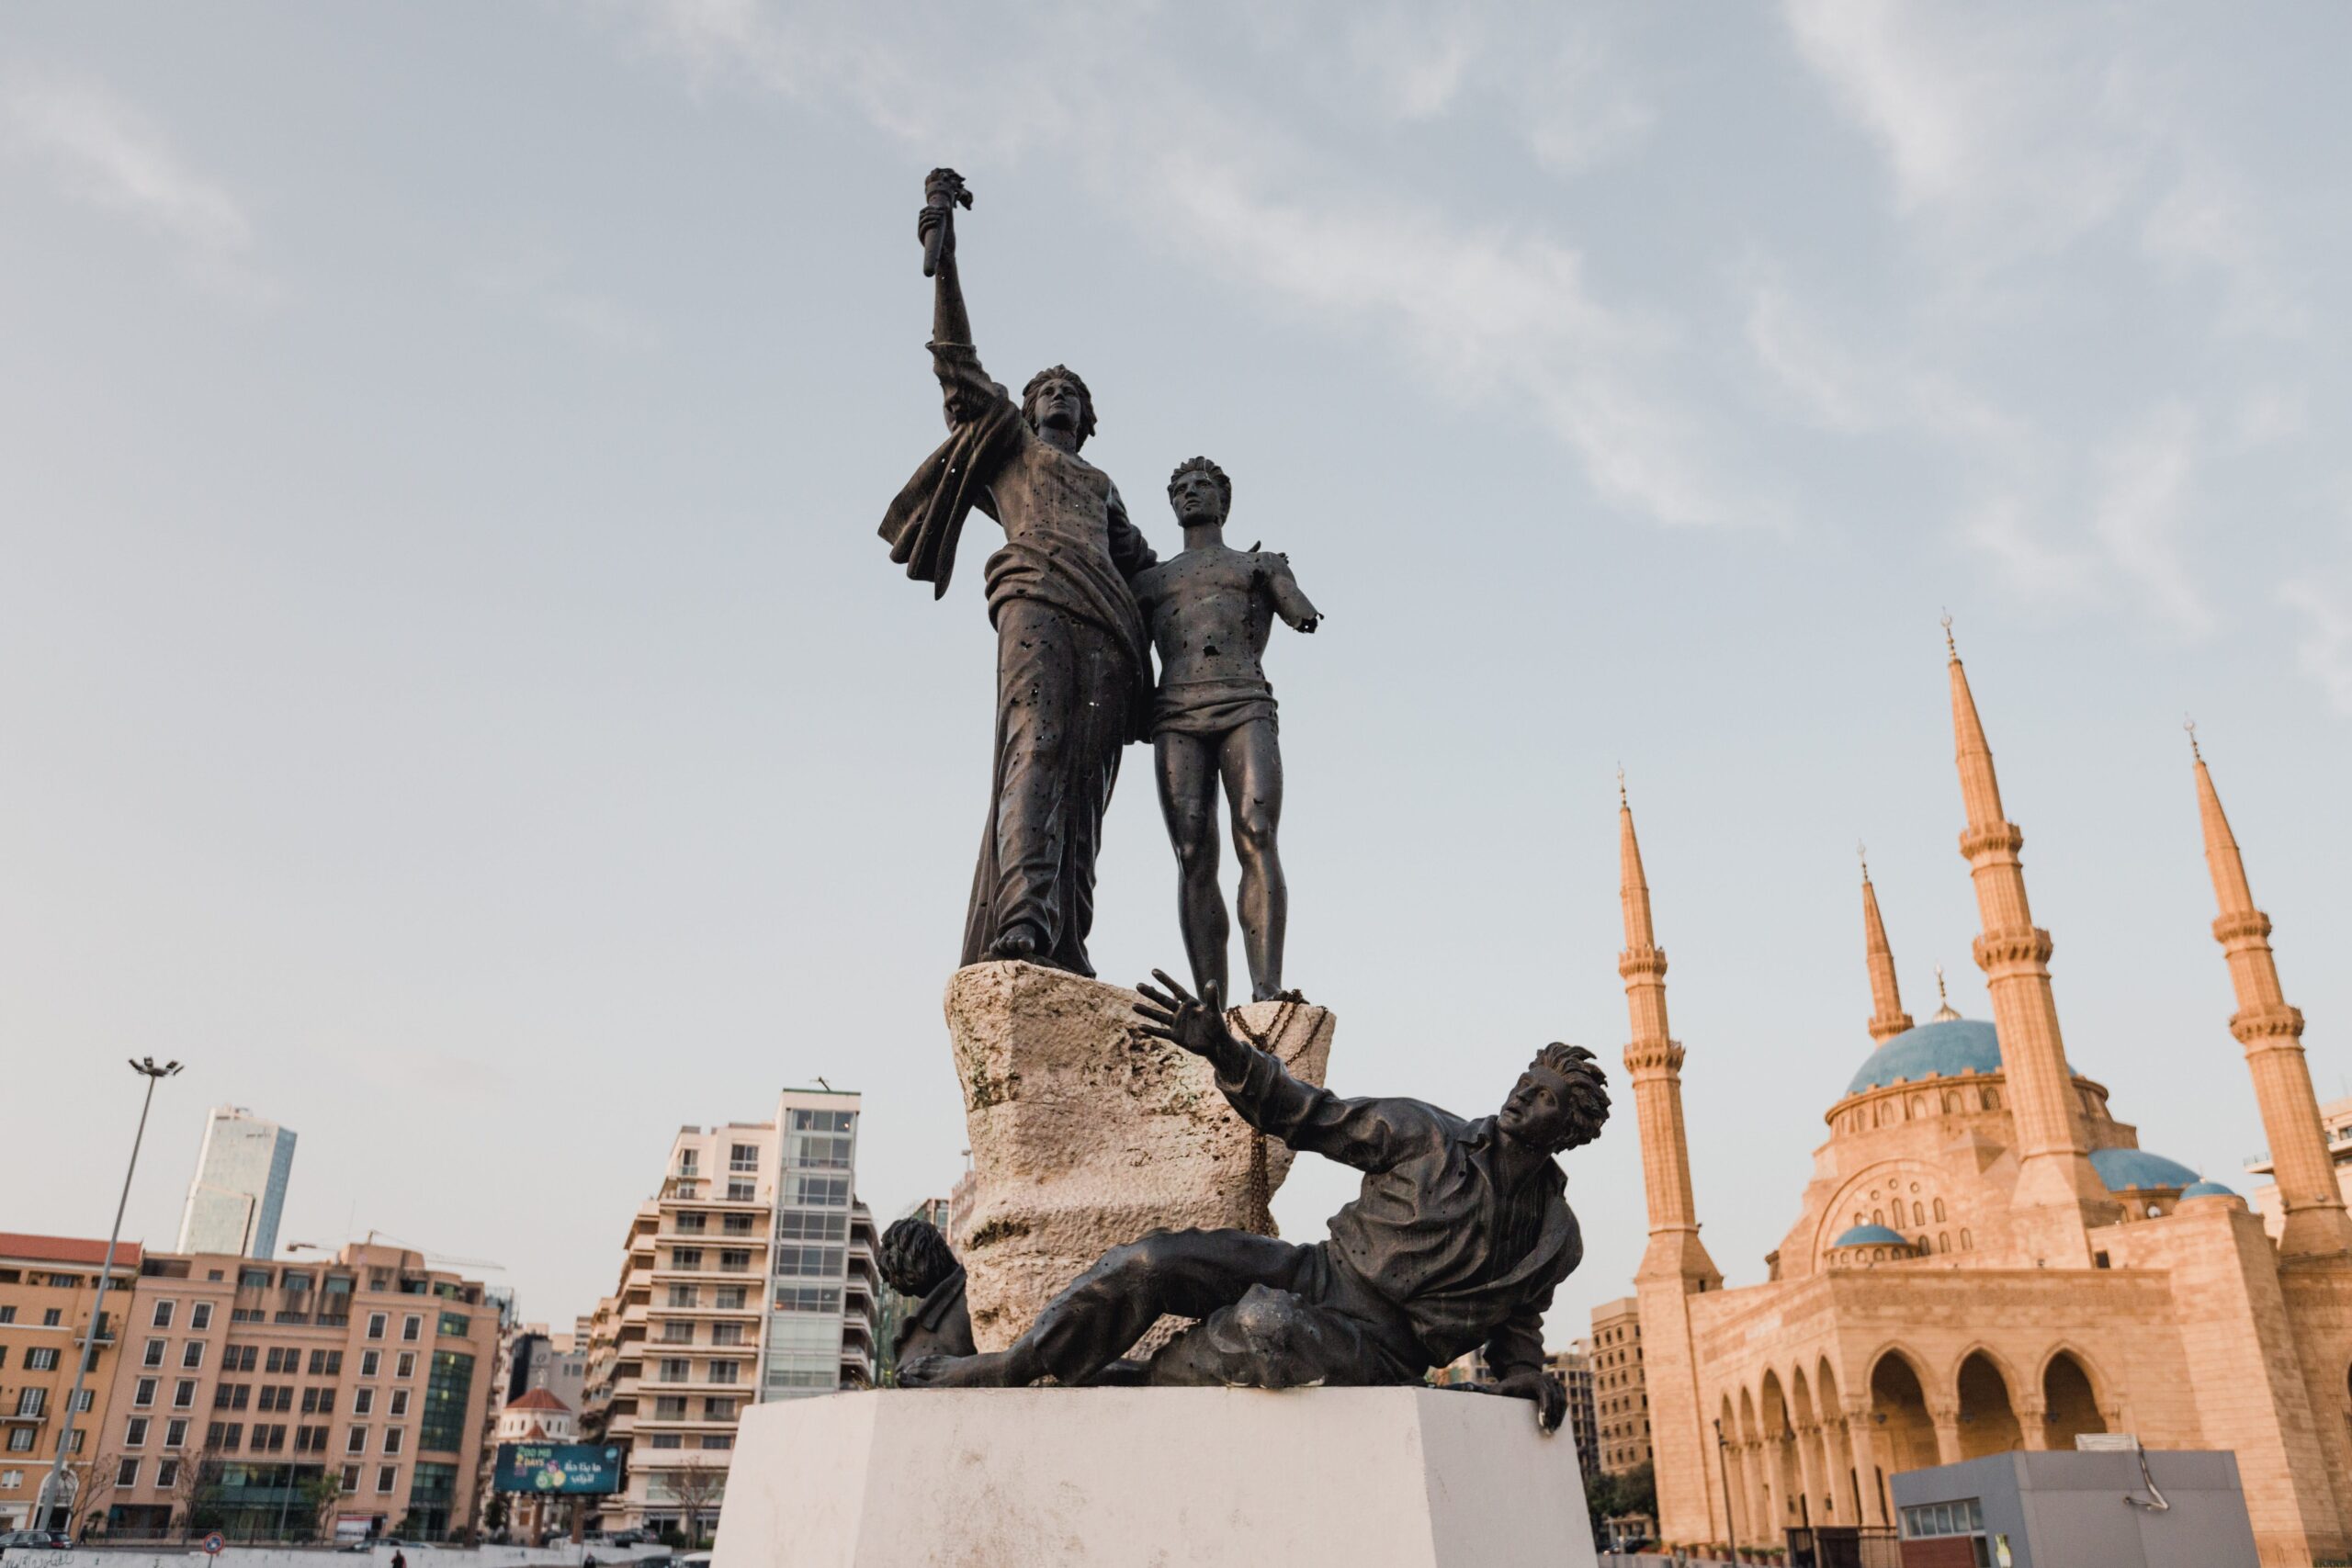 The Martyrs' Monument in Beirut. In the background, the Mohammad al-Amin mosque